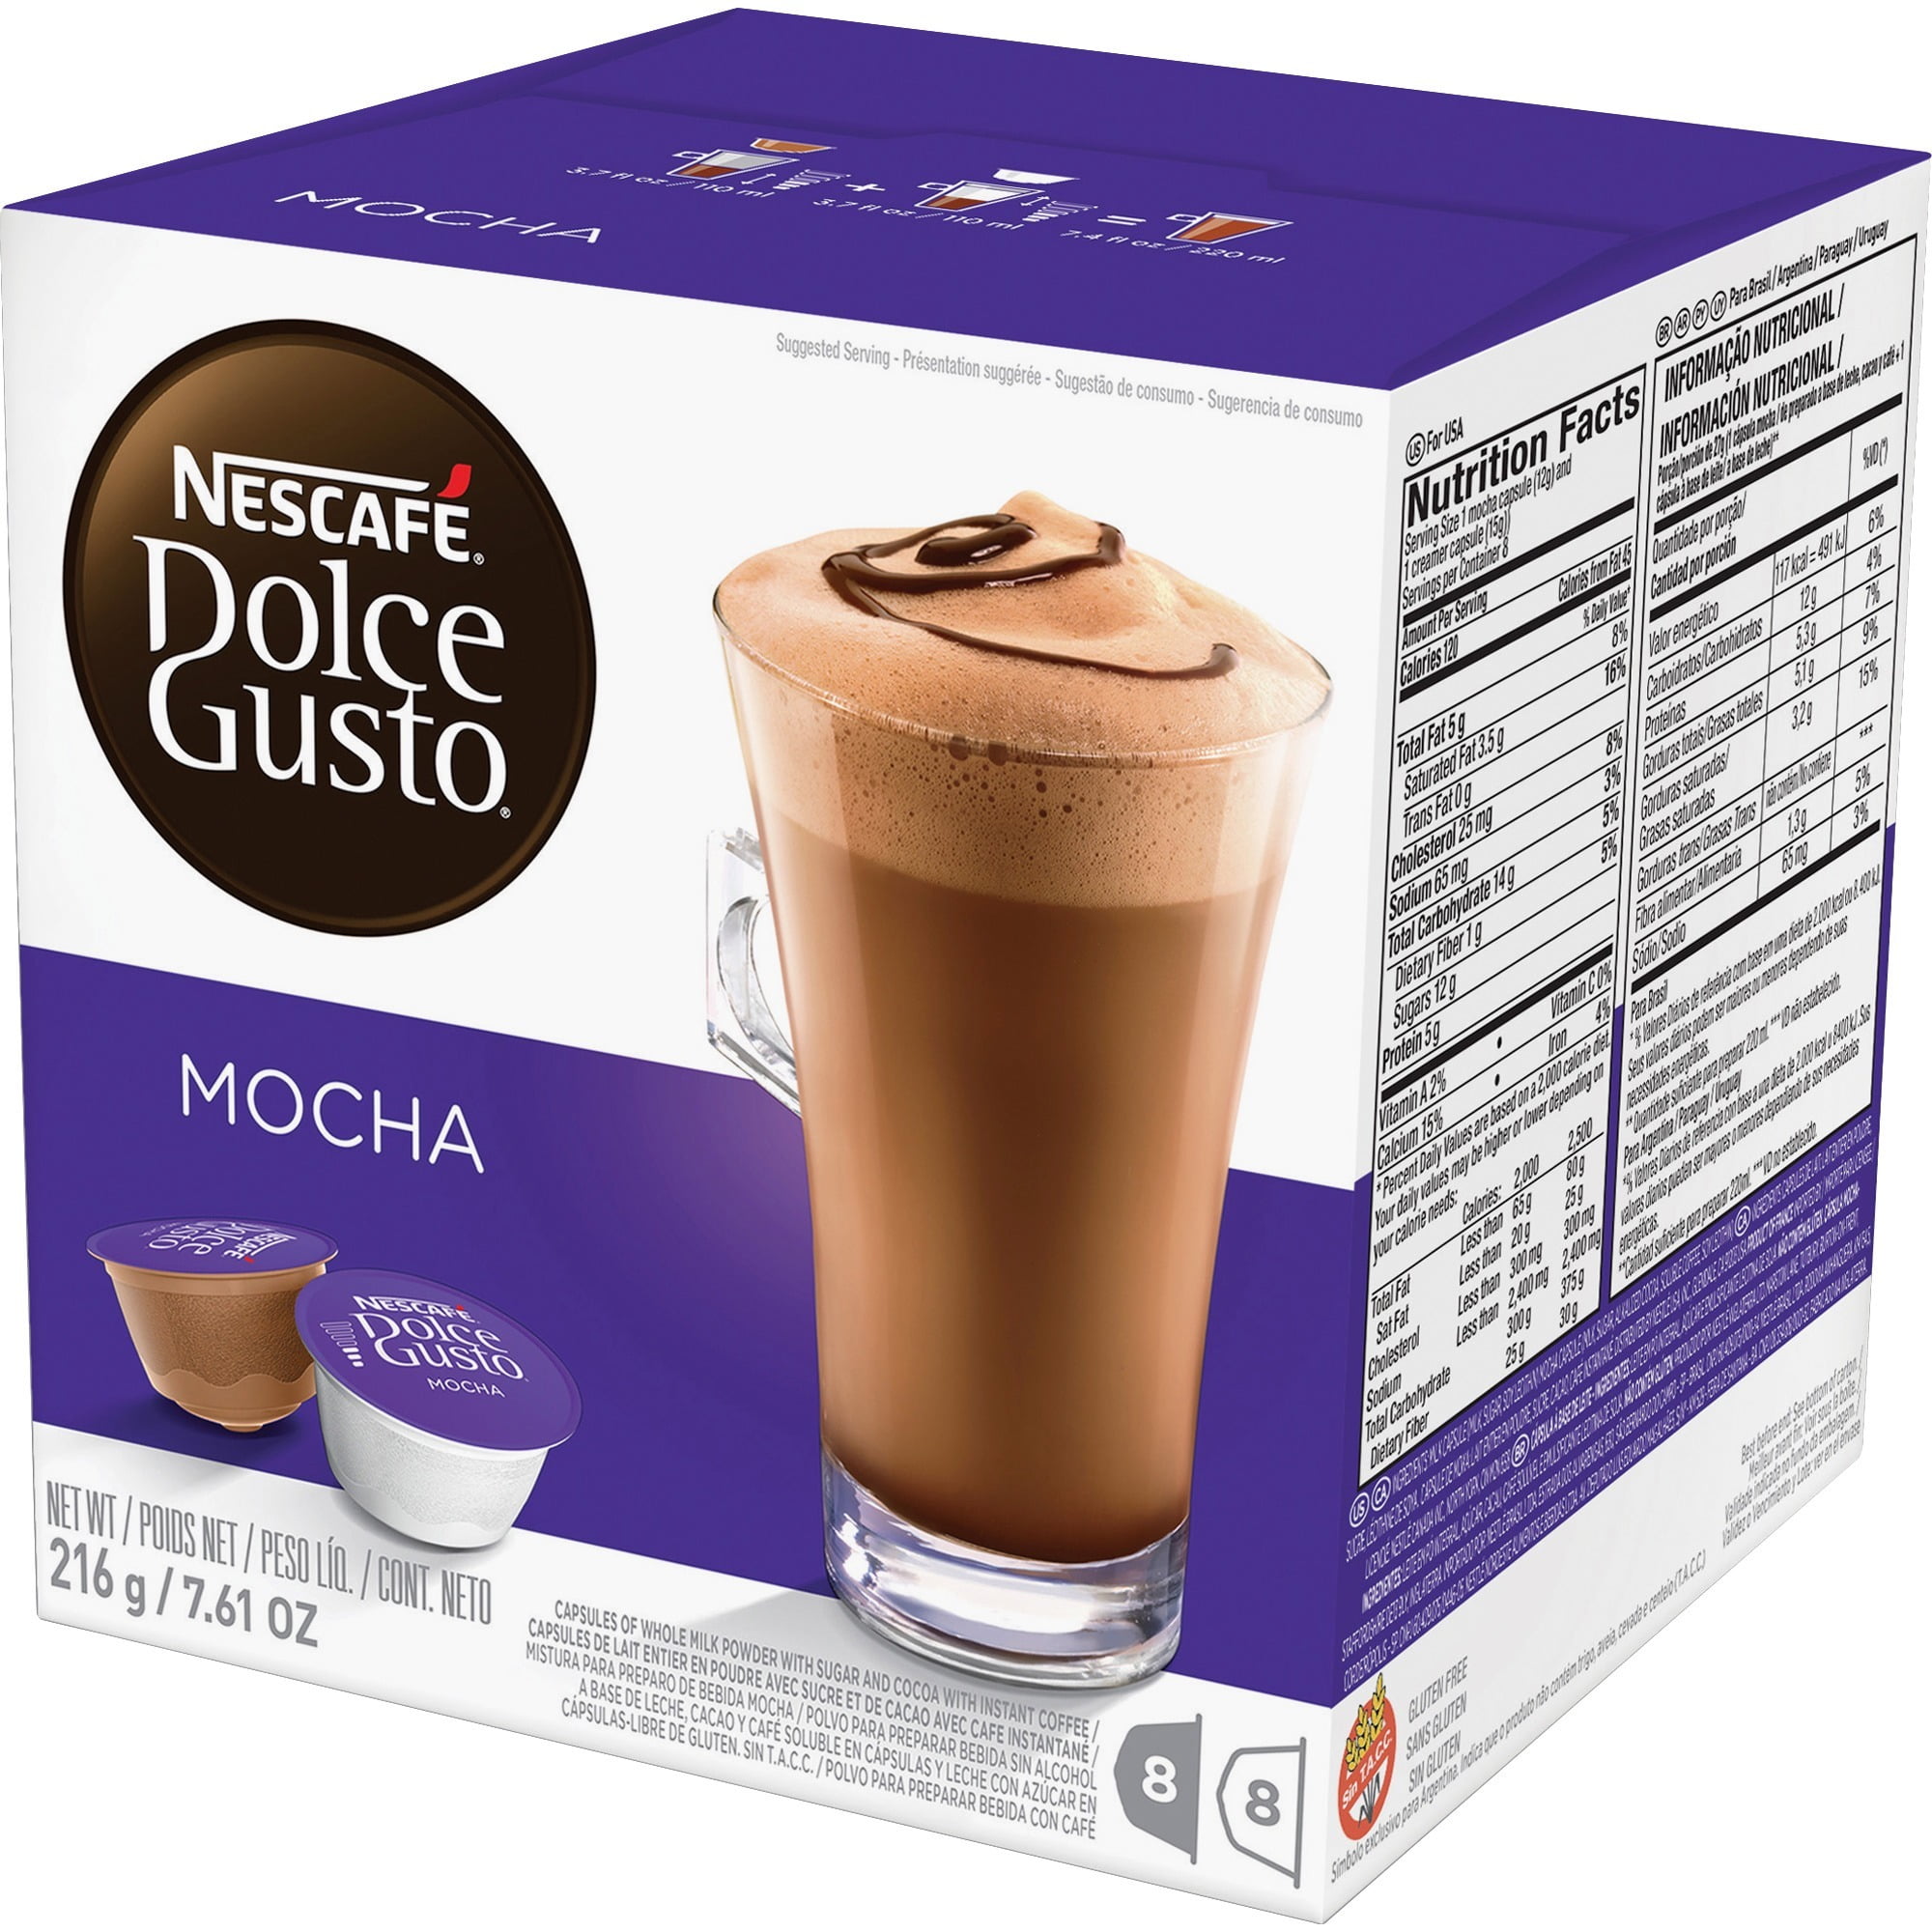  Nescafe Dolce Gusto Coffee Pods, Latte Macchiato, 16 capsules,  Pack of 3 : Coffee Brewing Machine Capsules : Everything Else